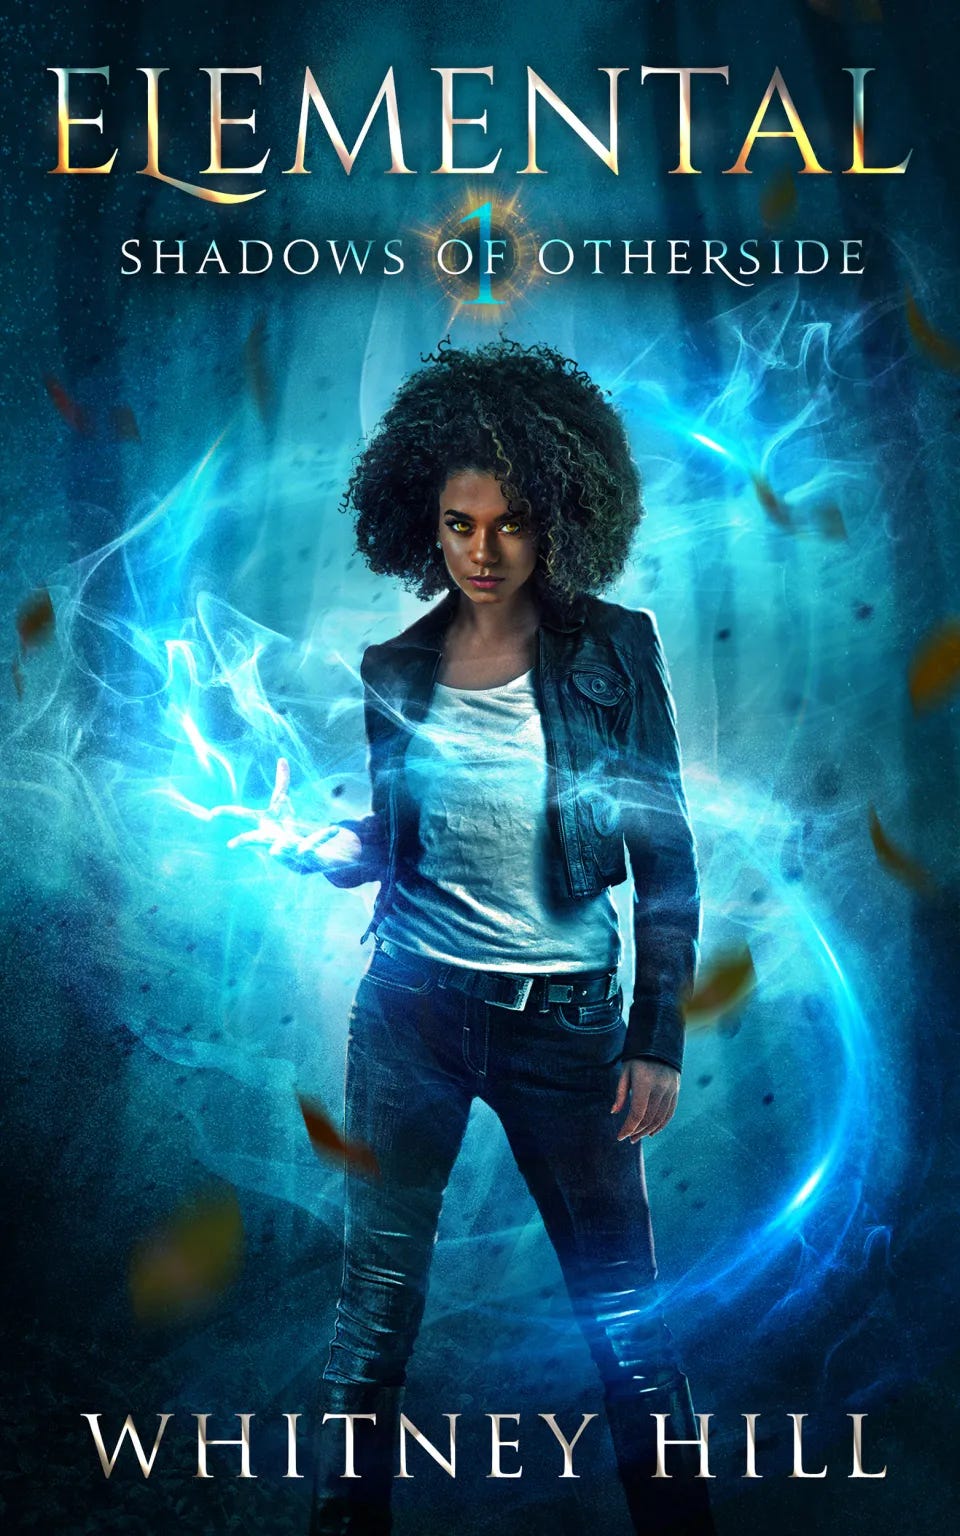 Cover of Elemental by Whitney Hill. A powerful Black woman with an afro, jeans, white shirt, and leather jacket conjuring magic.